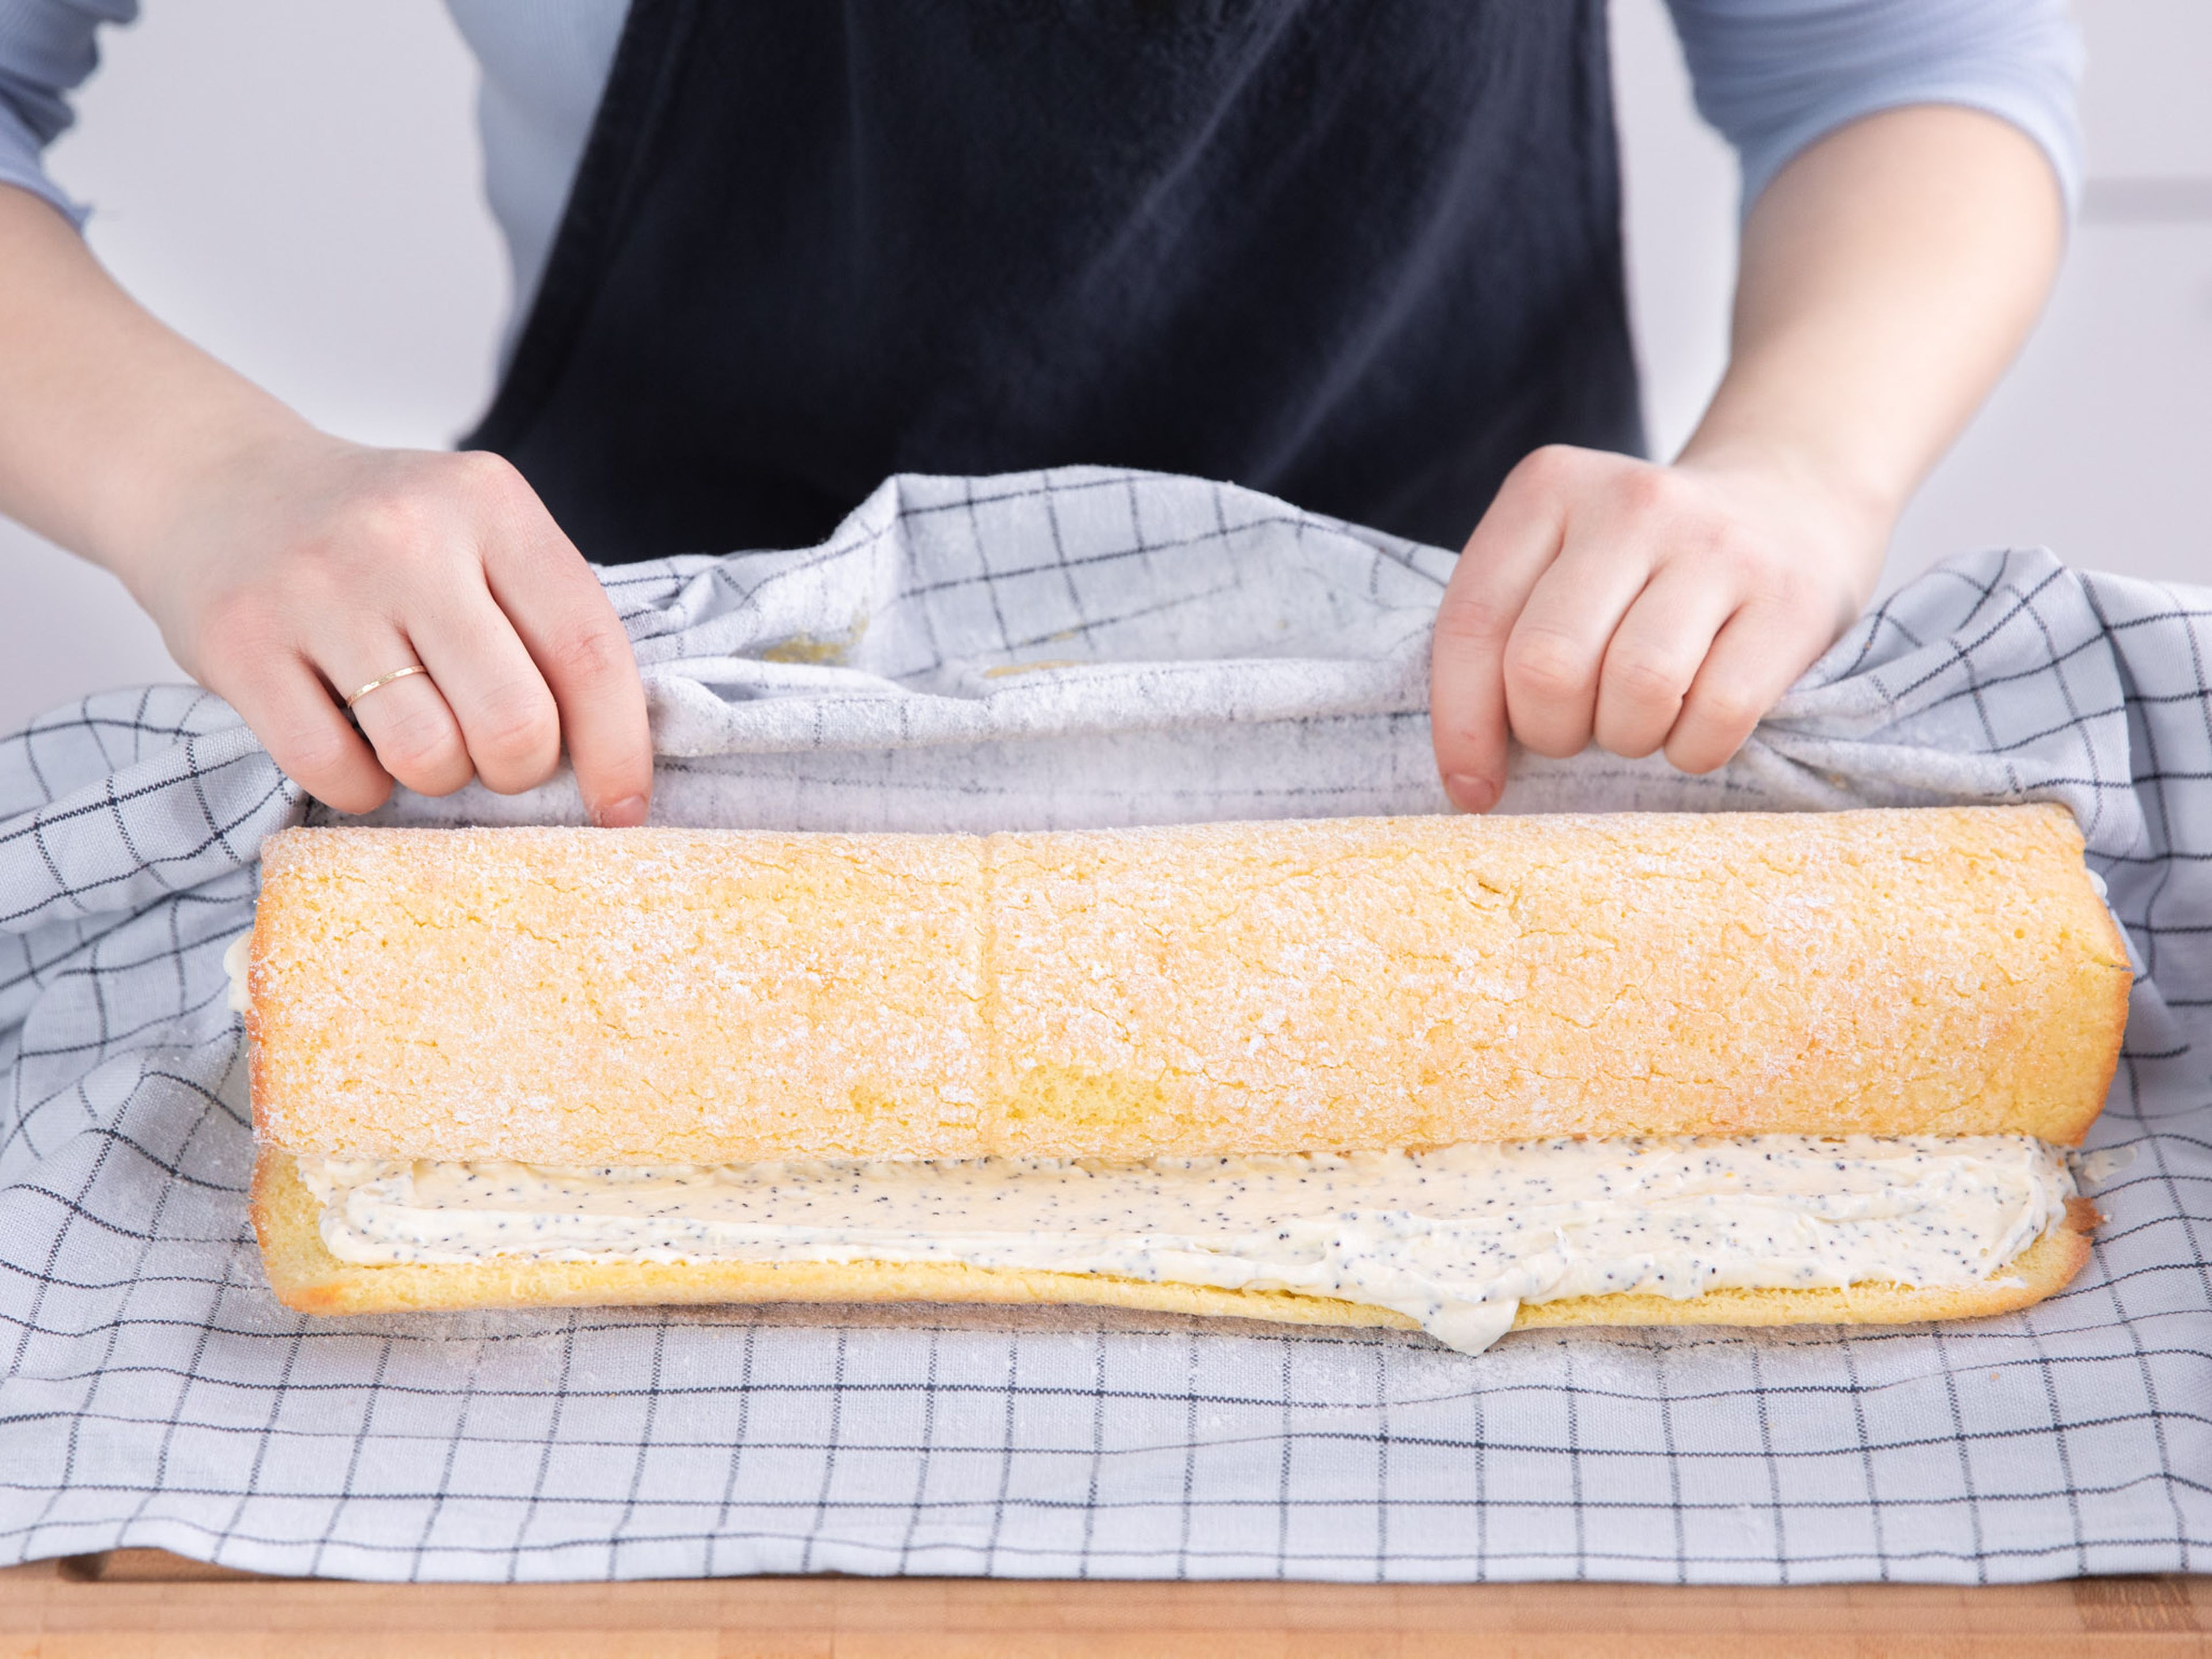 Once cake and filling are cooled, unroll cake and spread lemon and poppy seed filling over the cake. Carefully roll up the cake and wrap in plastic wrap. Refrigerate for approx. 1 hr. Dust with more confectioner’s sugar before serving, slice, and garnish with lemon zest and fresh mint. Enjoy!